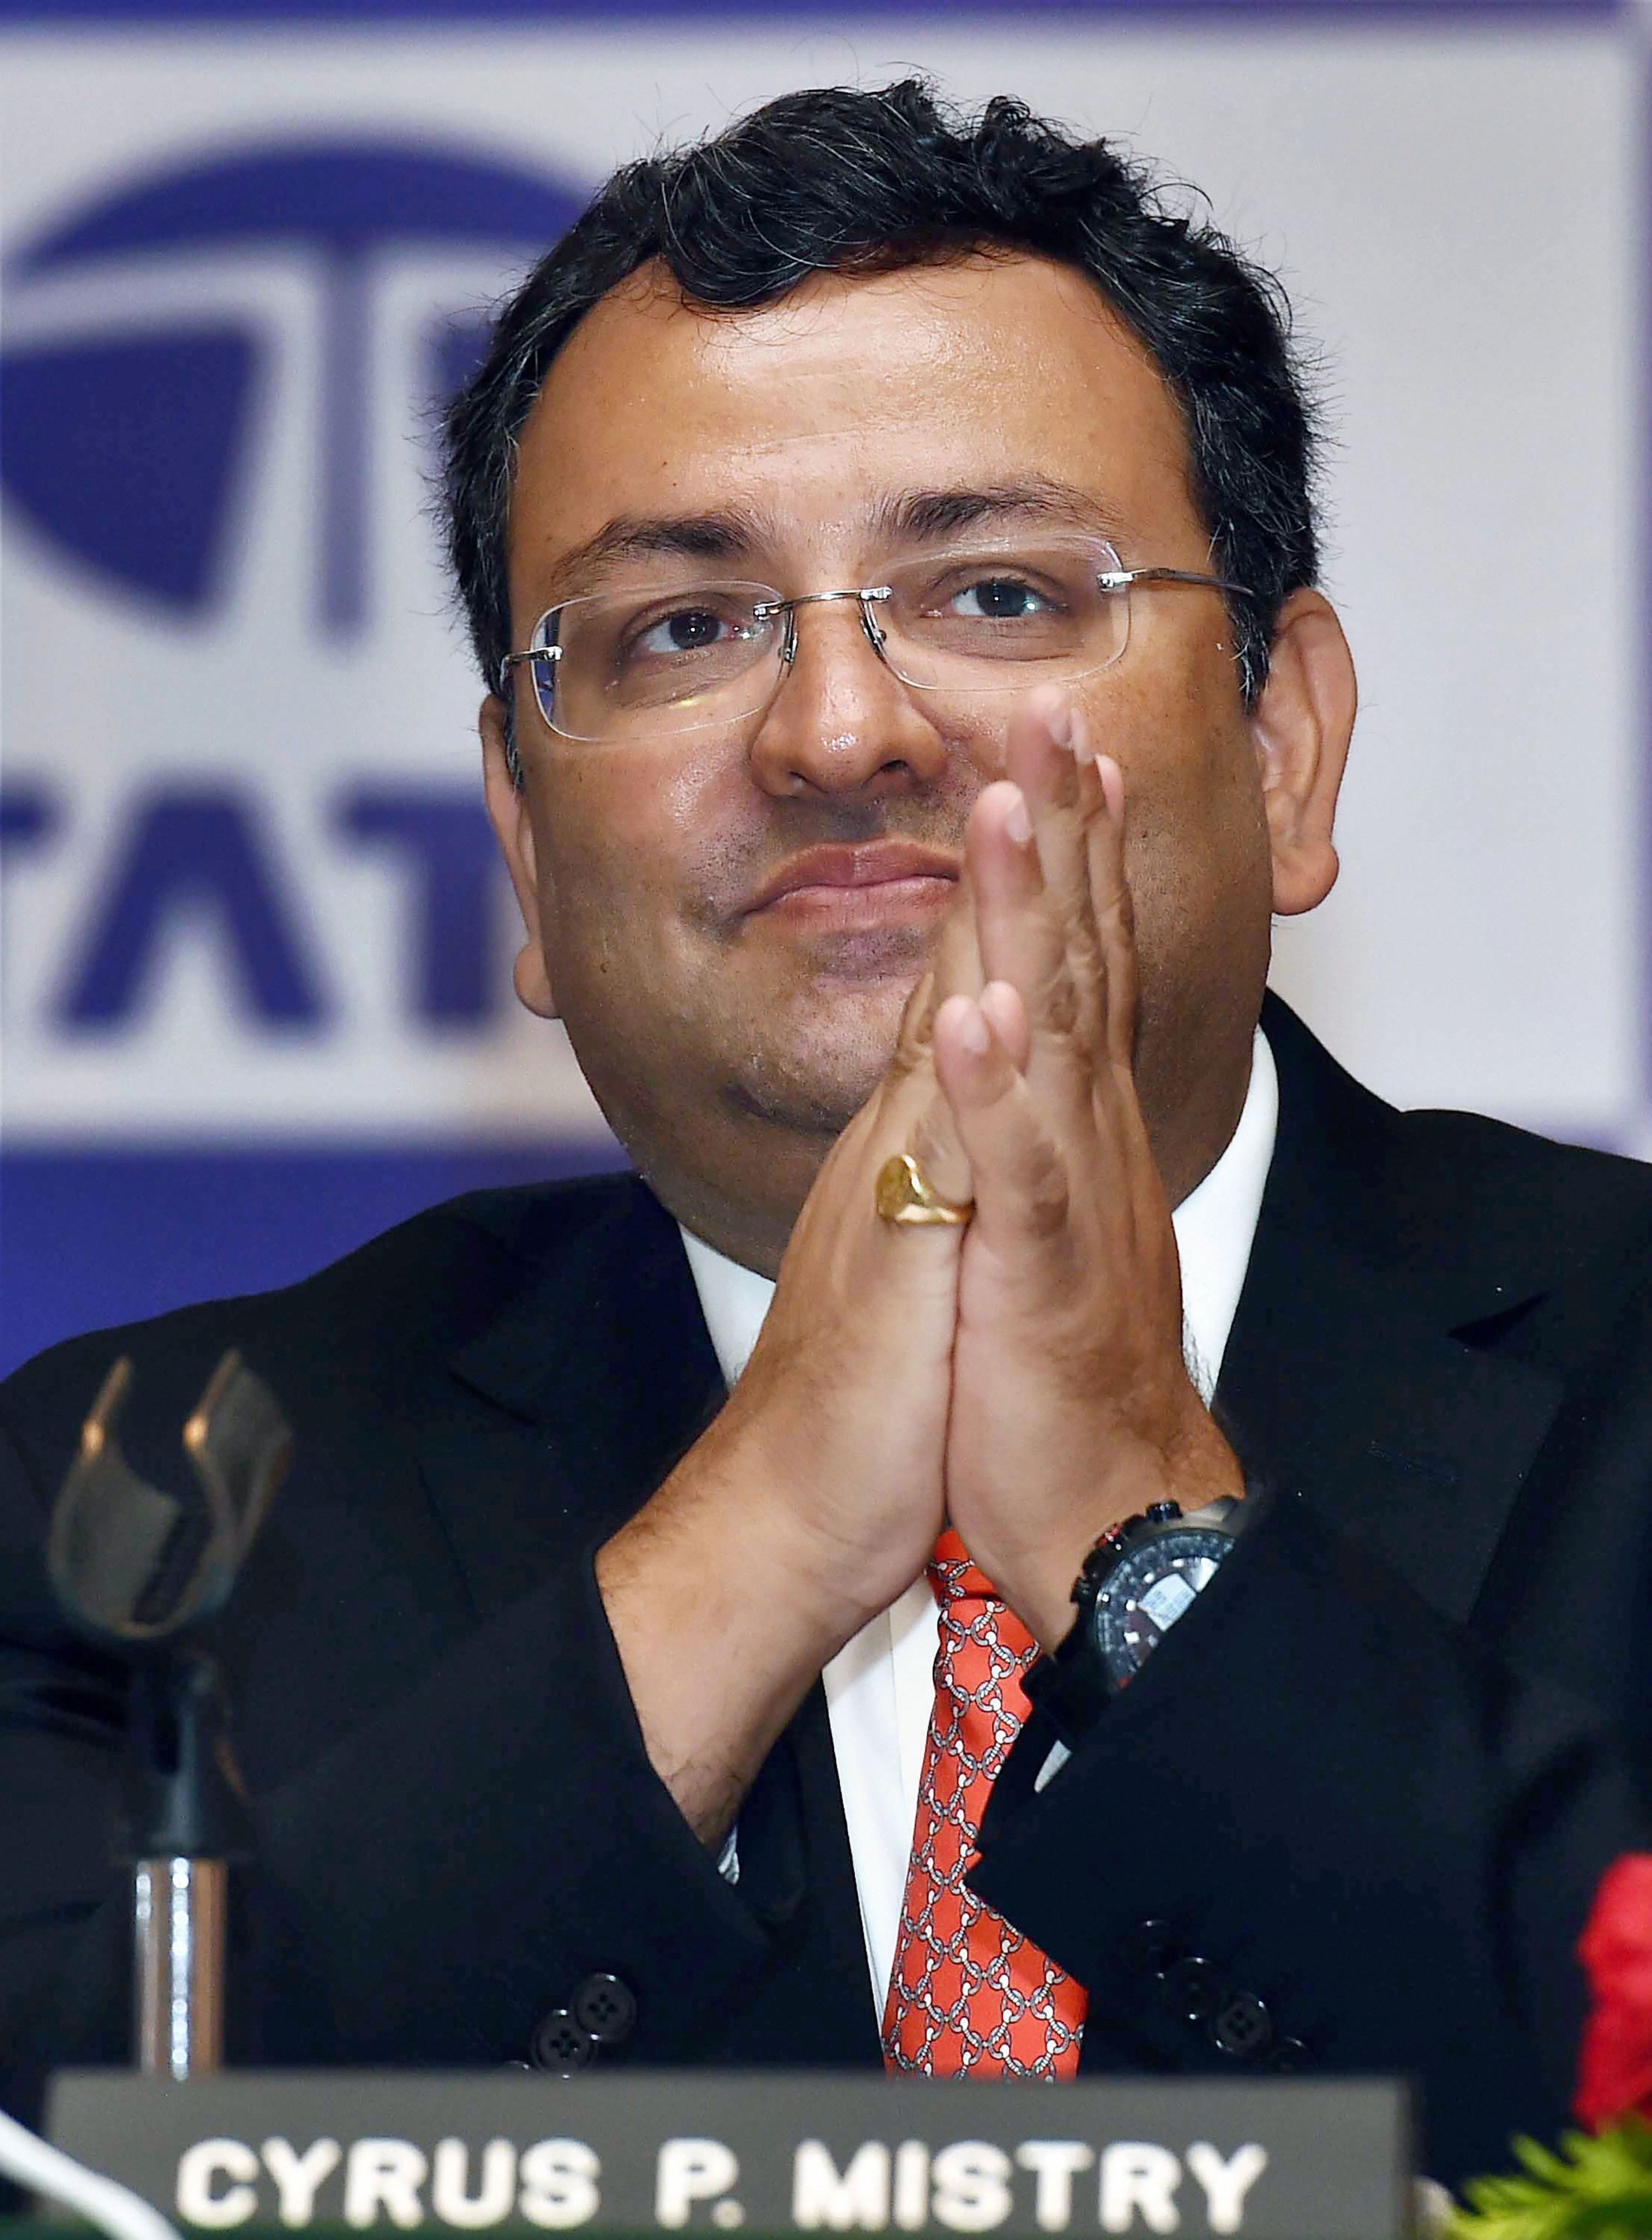 To dispel the misinformation campaign being conducted, I intend to make it clear that despite the NCLAT order in my favour, I will not be pursuing the executive chairmanship of Tata Sons or directorship of TCS, Tata Teleservices, Tata Industries, Cyrus Mistry said.